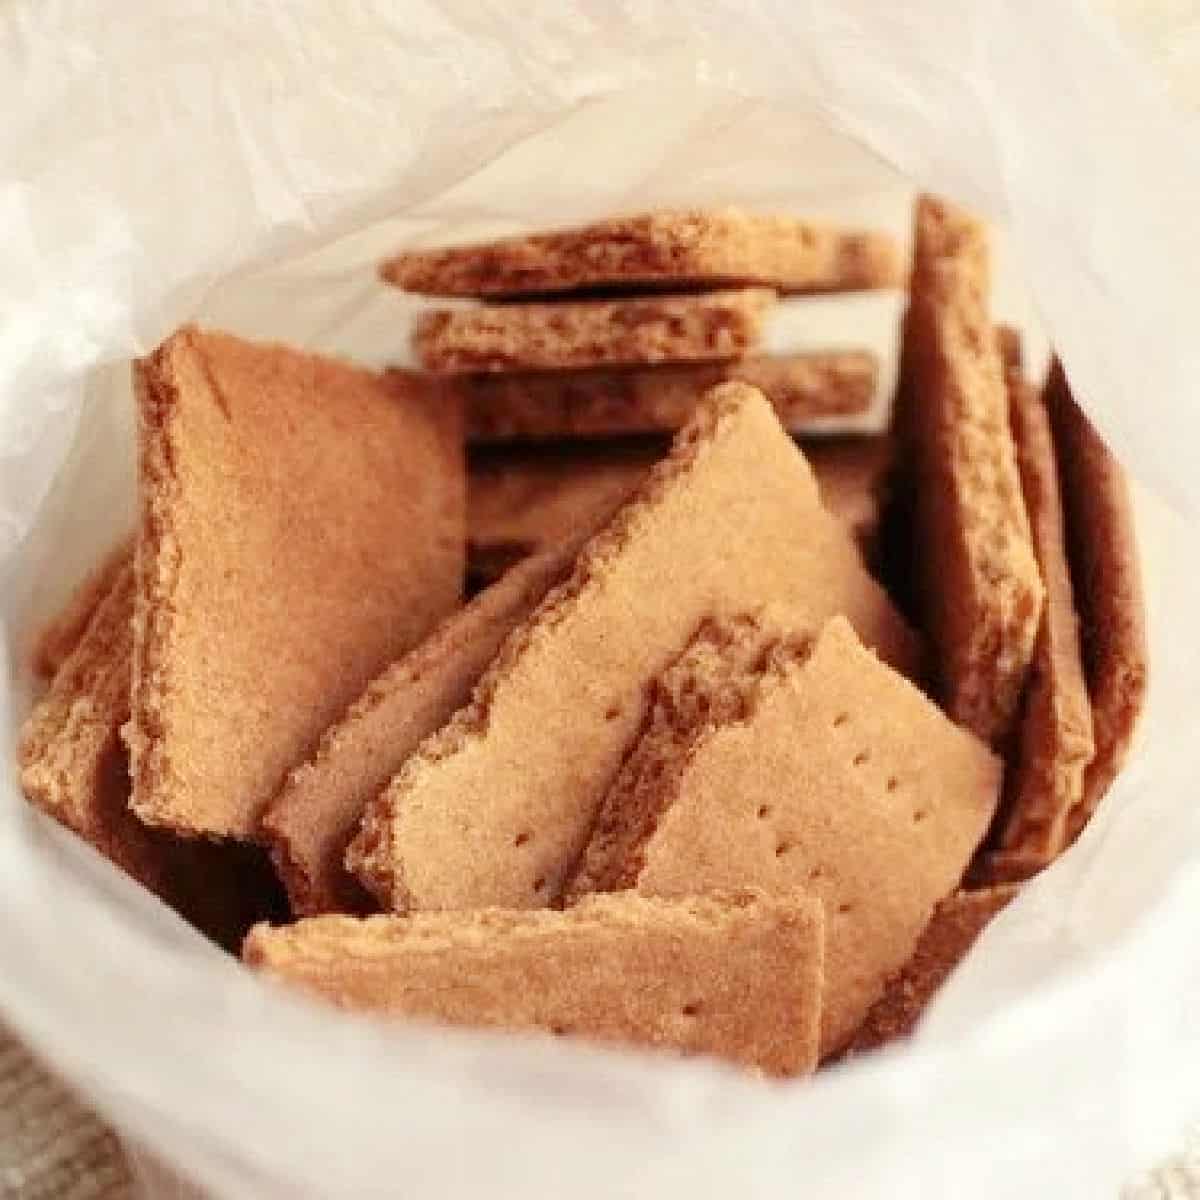 Several pieces of homemade graham crackers in an opened plastic bag. View from the top.